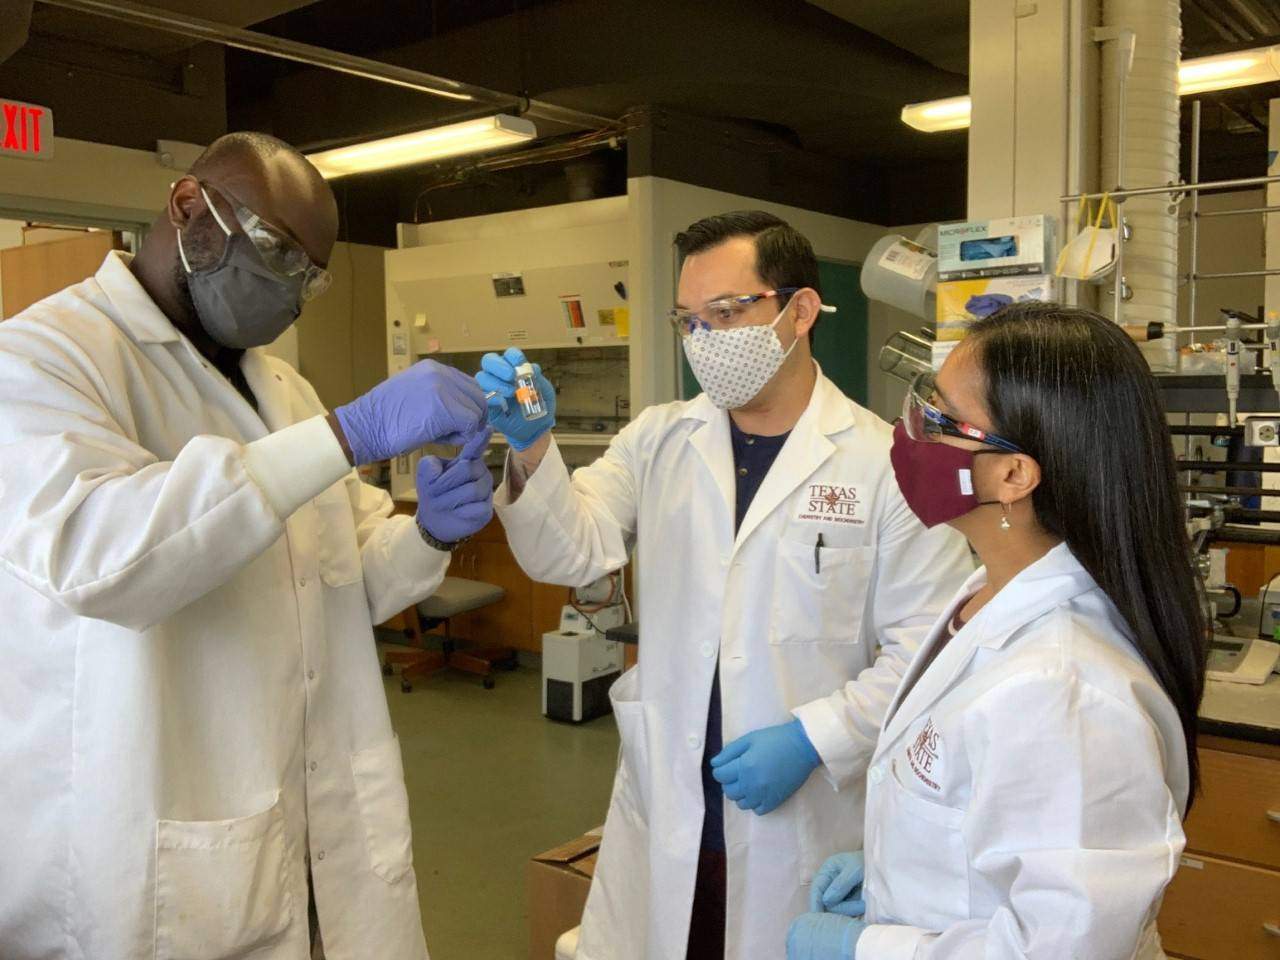 Dr. Betancourt with Damilola Runsewe (left), doctoral student in MSEC program, and Emilio Lara (middle), M.S. student in biochemistry, discussing observations of polymer samples.